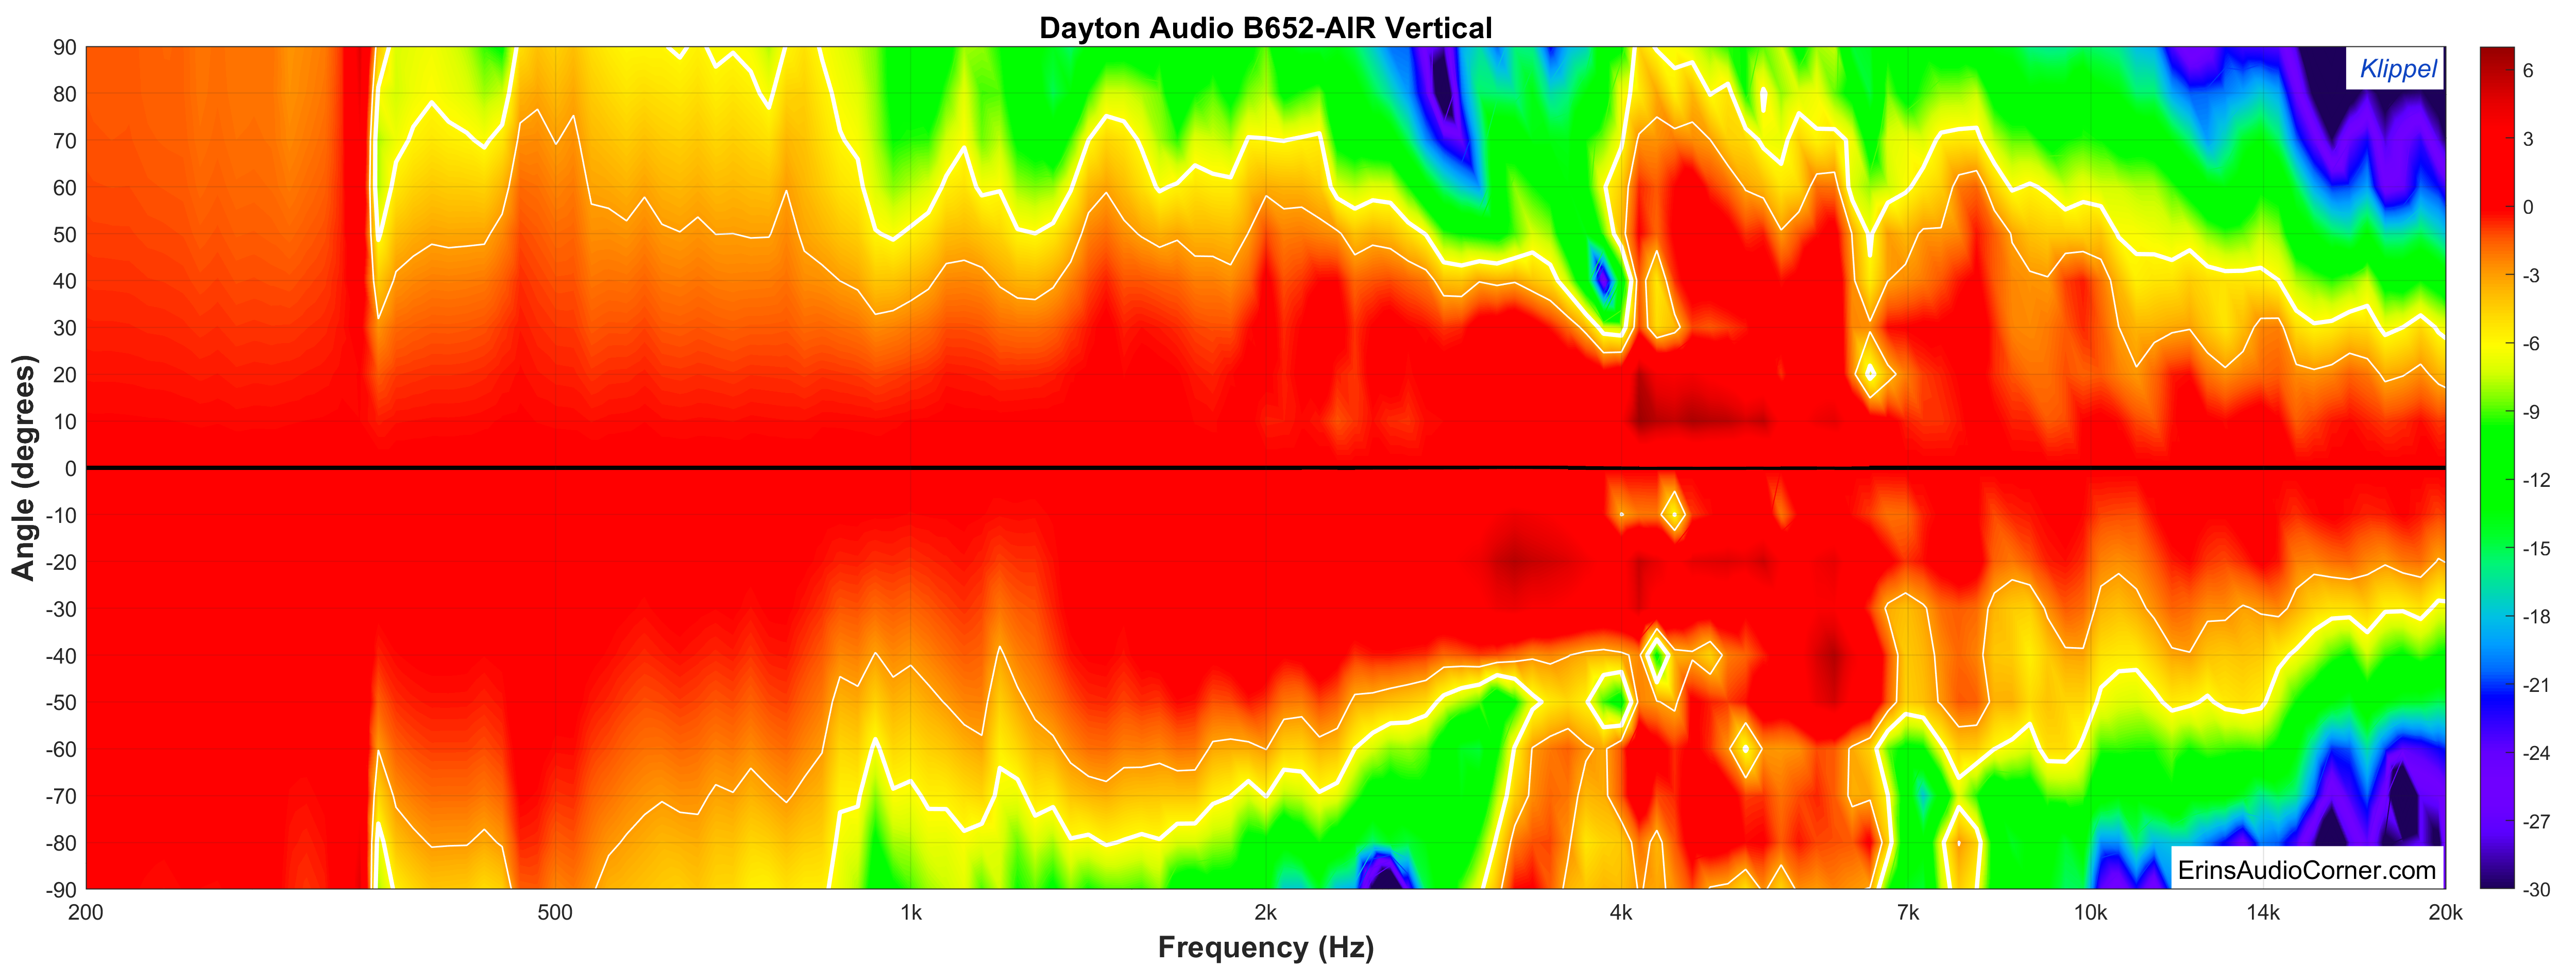 Dayton Audio B652-AIR_Vertical_spectro_x200_fill_labeled.png